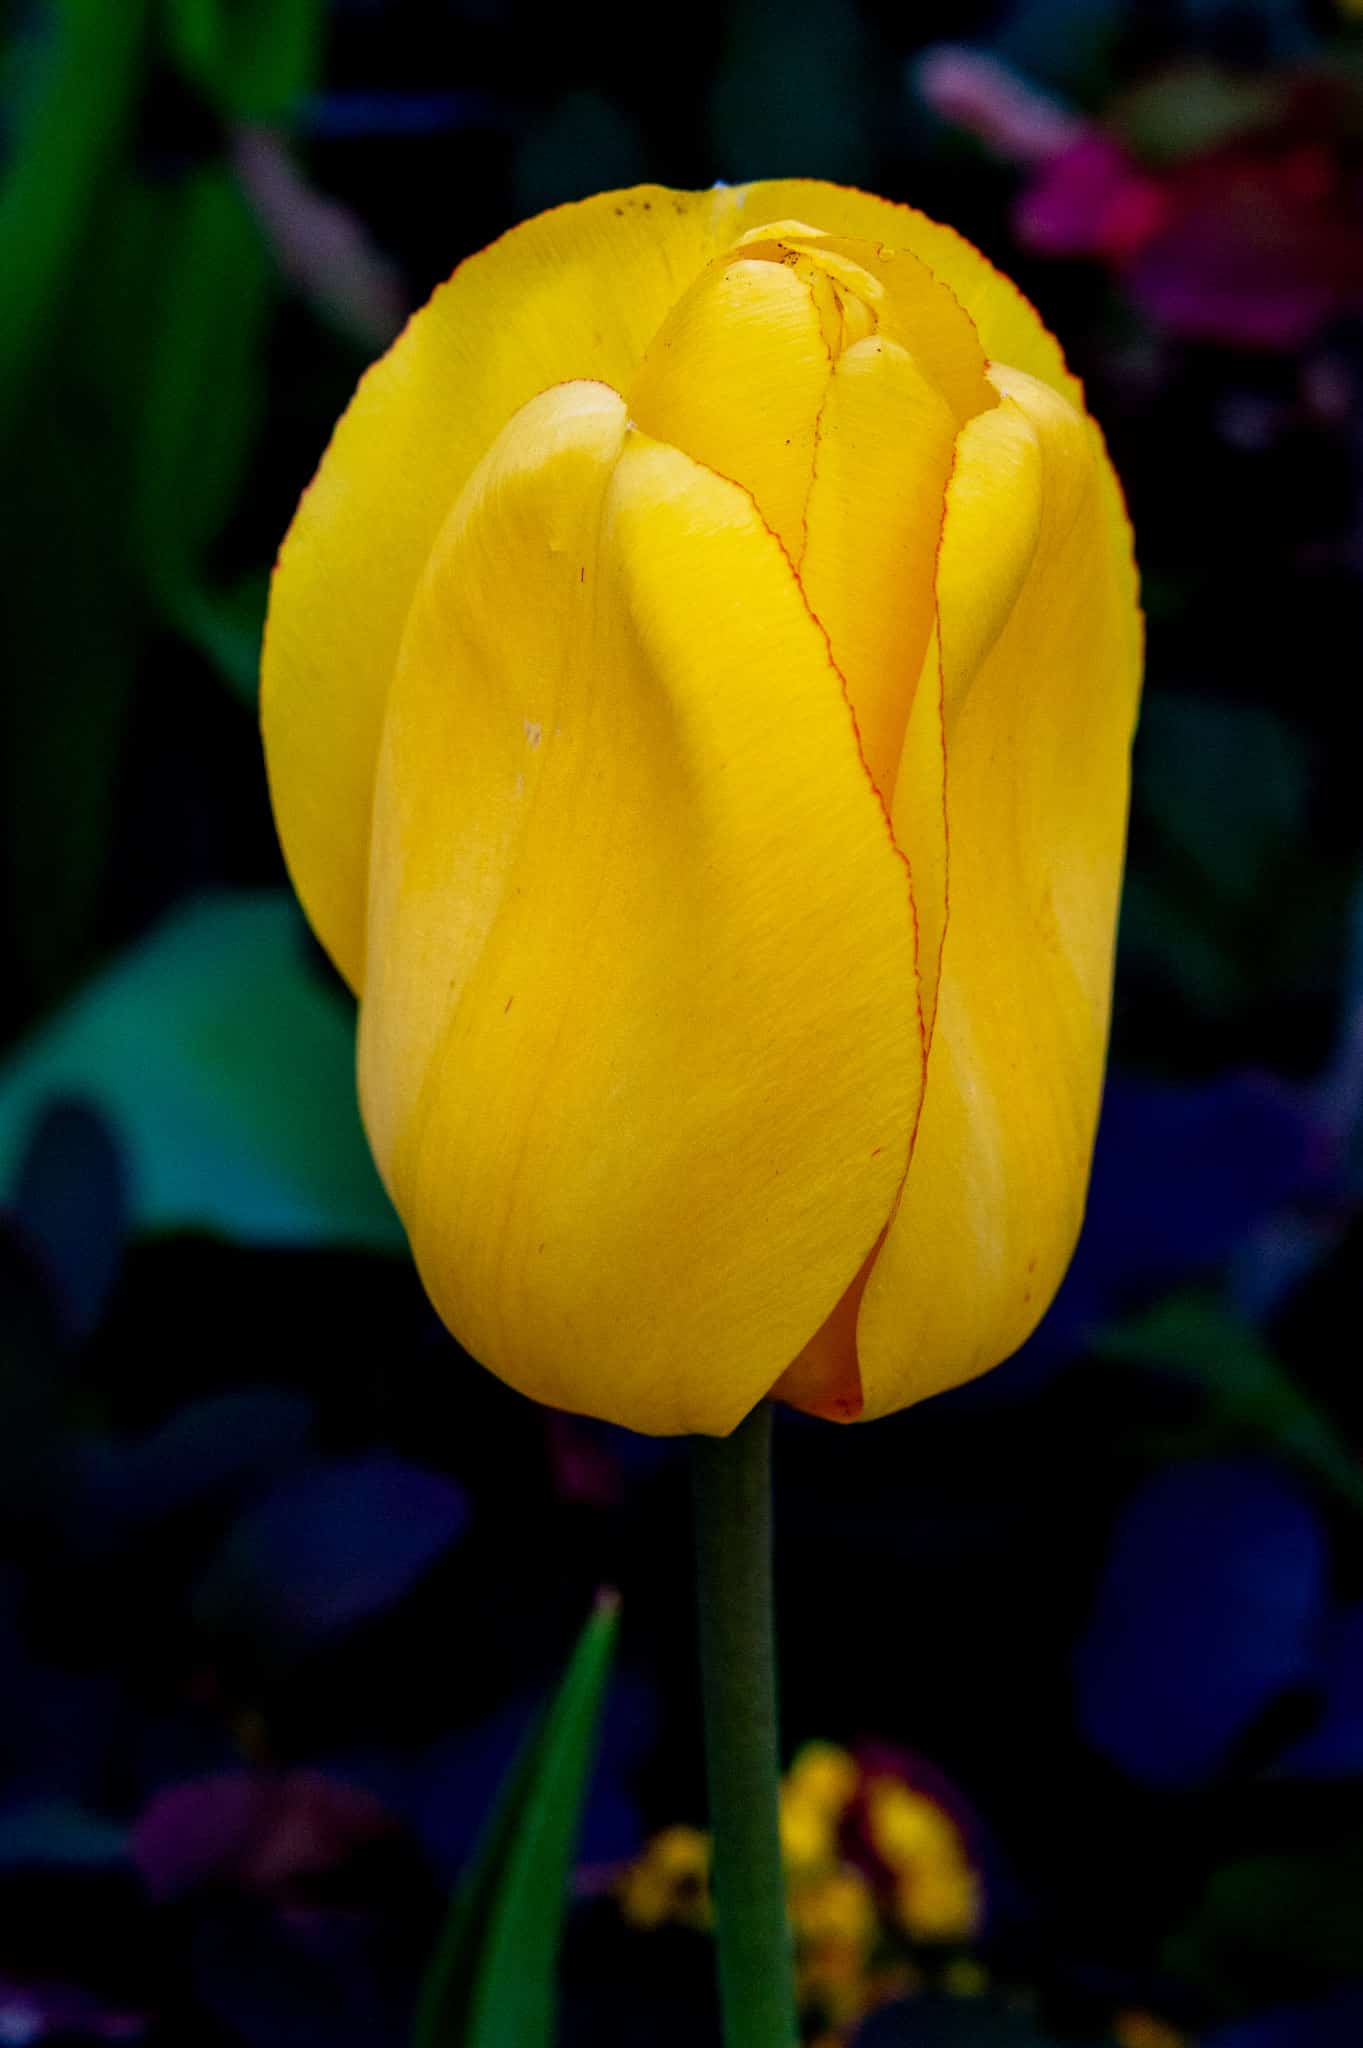 This portrait of a yellow tulip highlights the faint red edge of its petals.